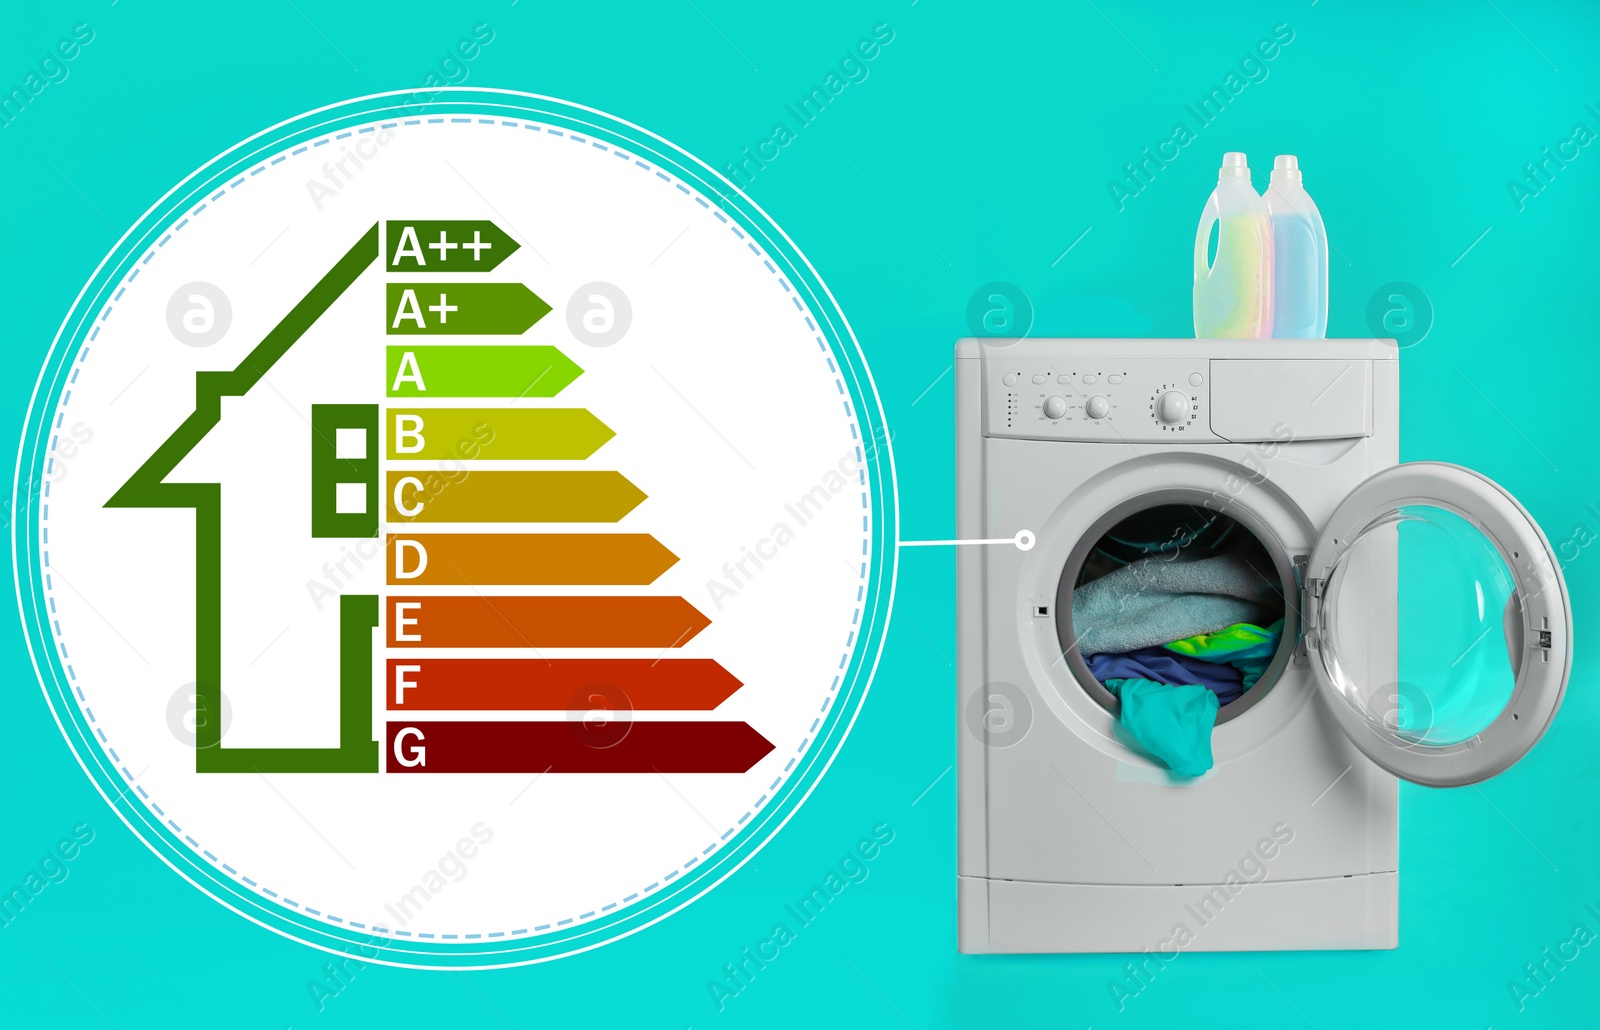 Image of Energy efficiency rating label and washing machine with laundry on turquoise background